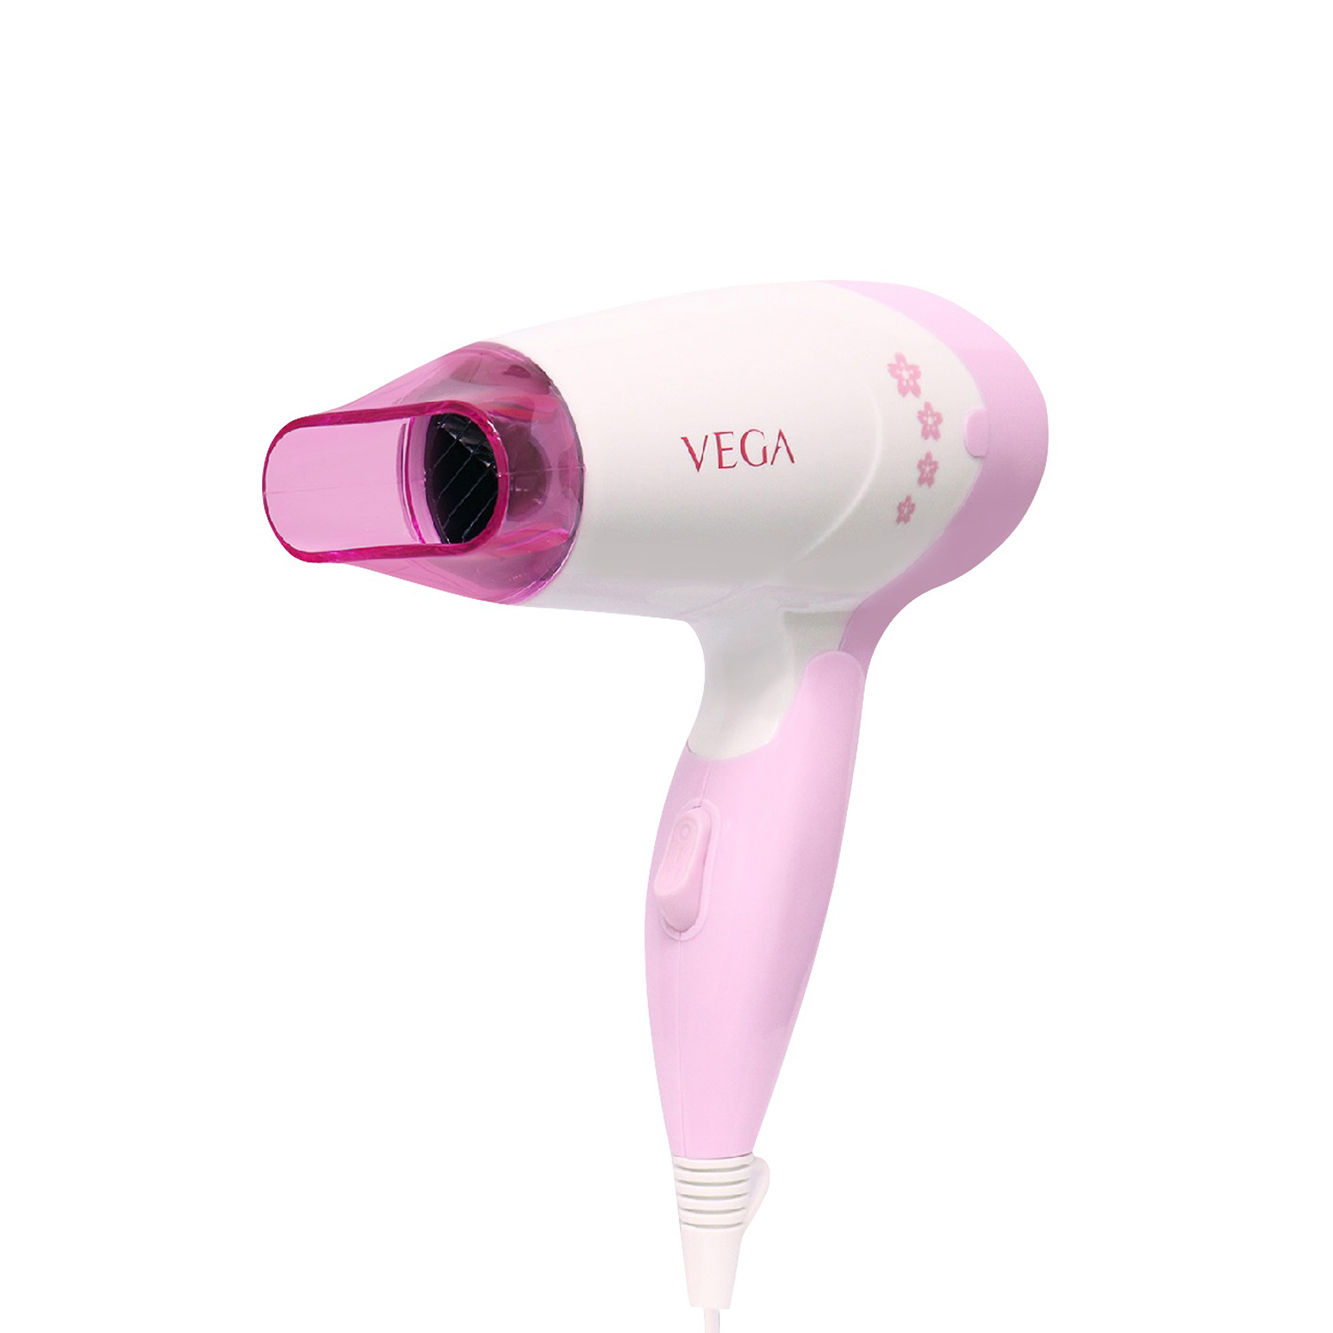 Buy Hair Dryer Pink Online at Best Price in India